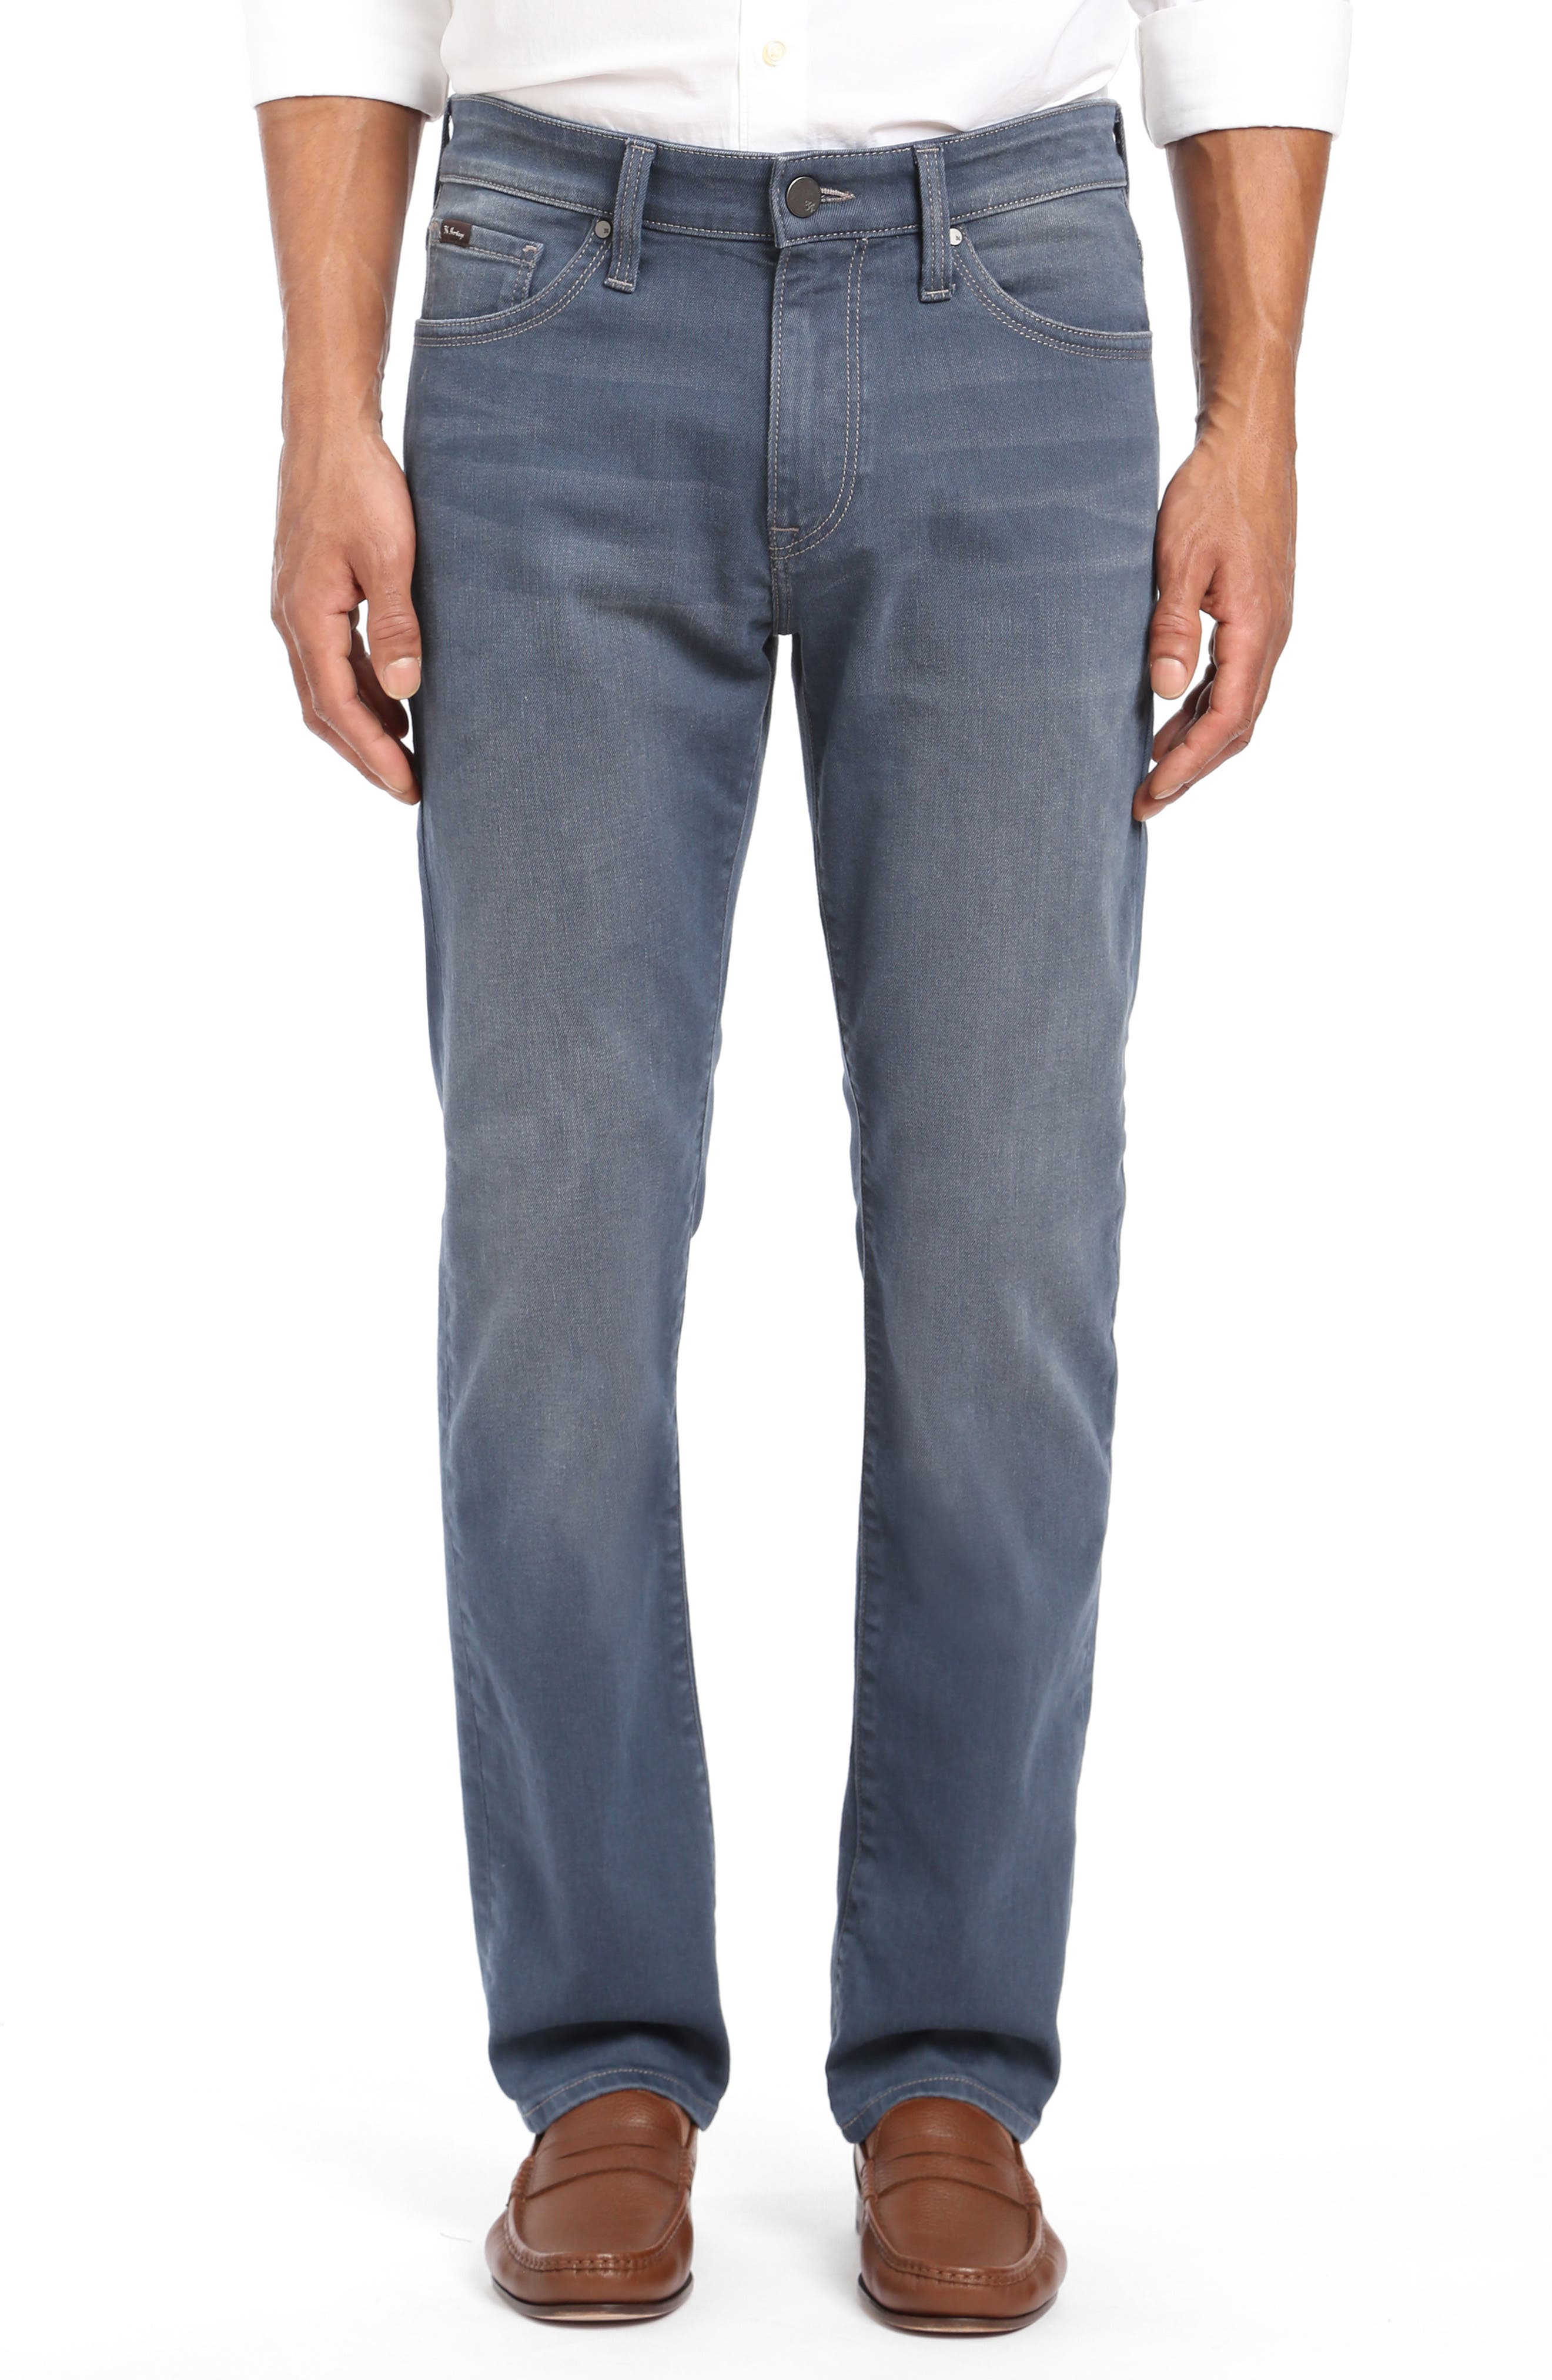 heritage courage jeans